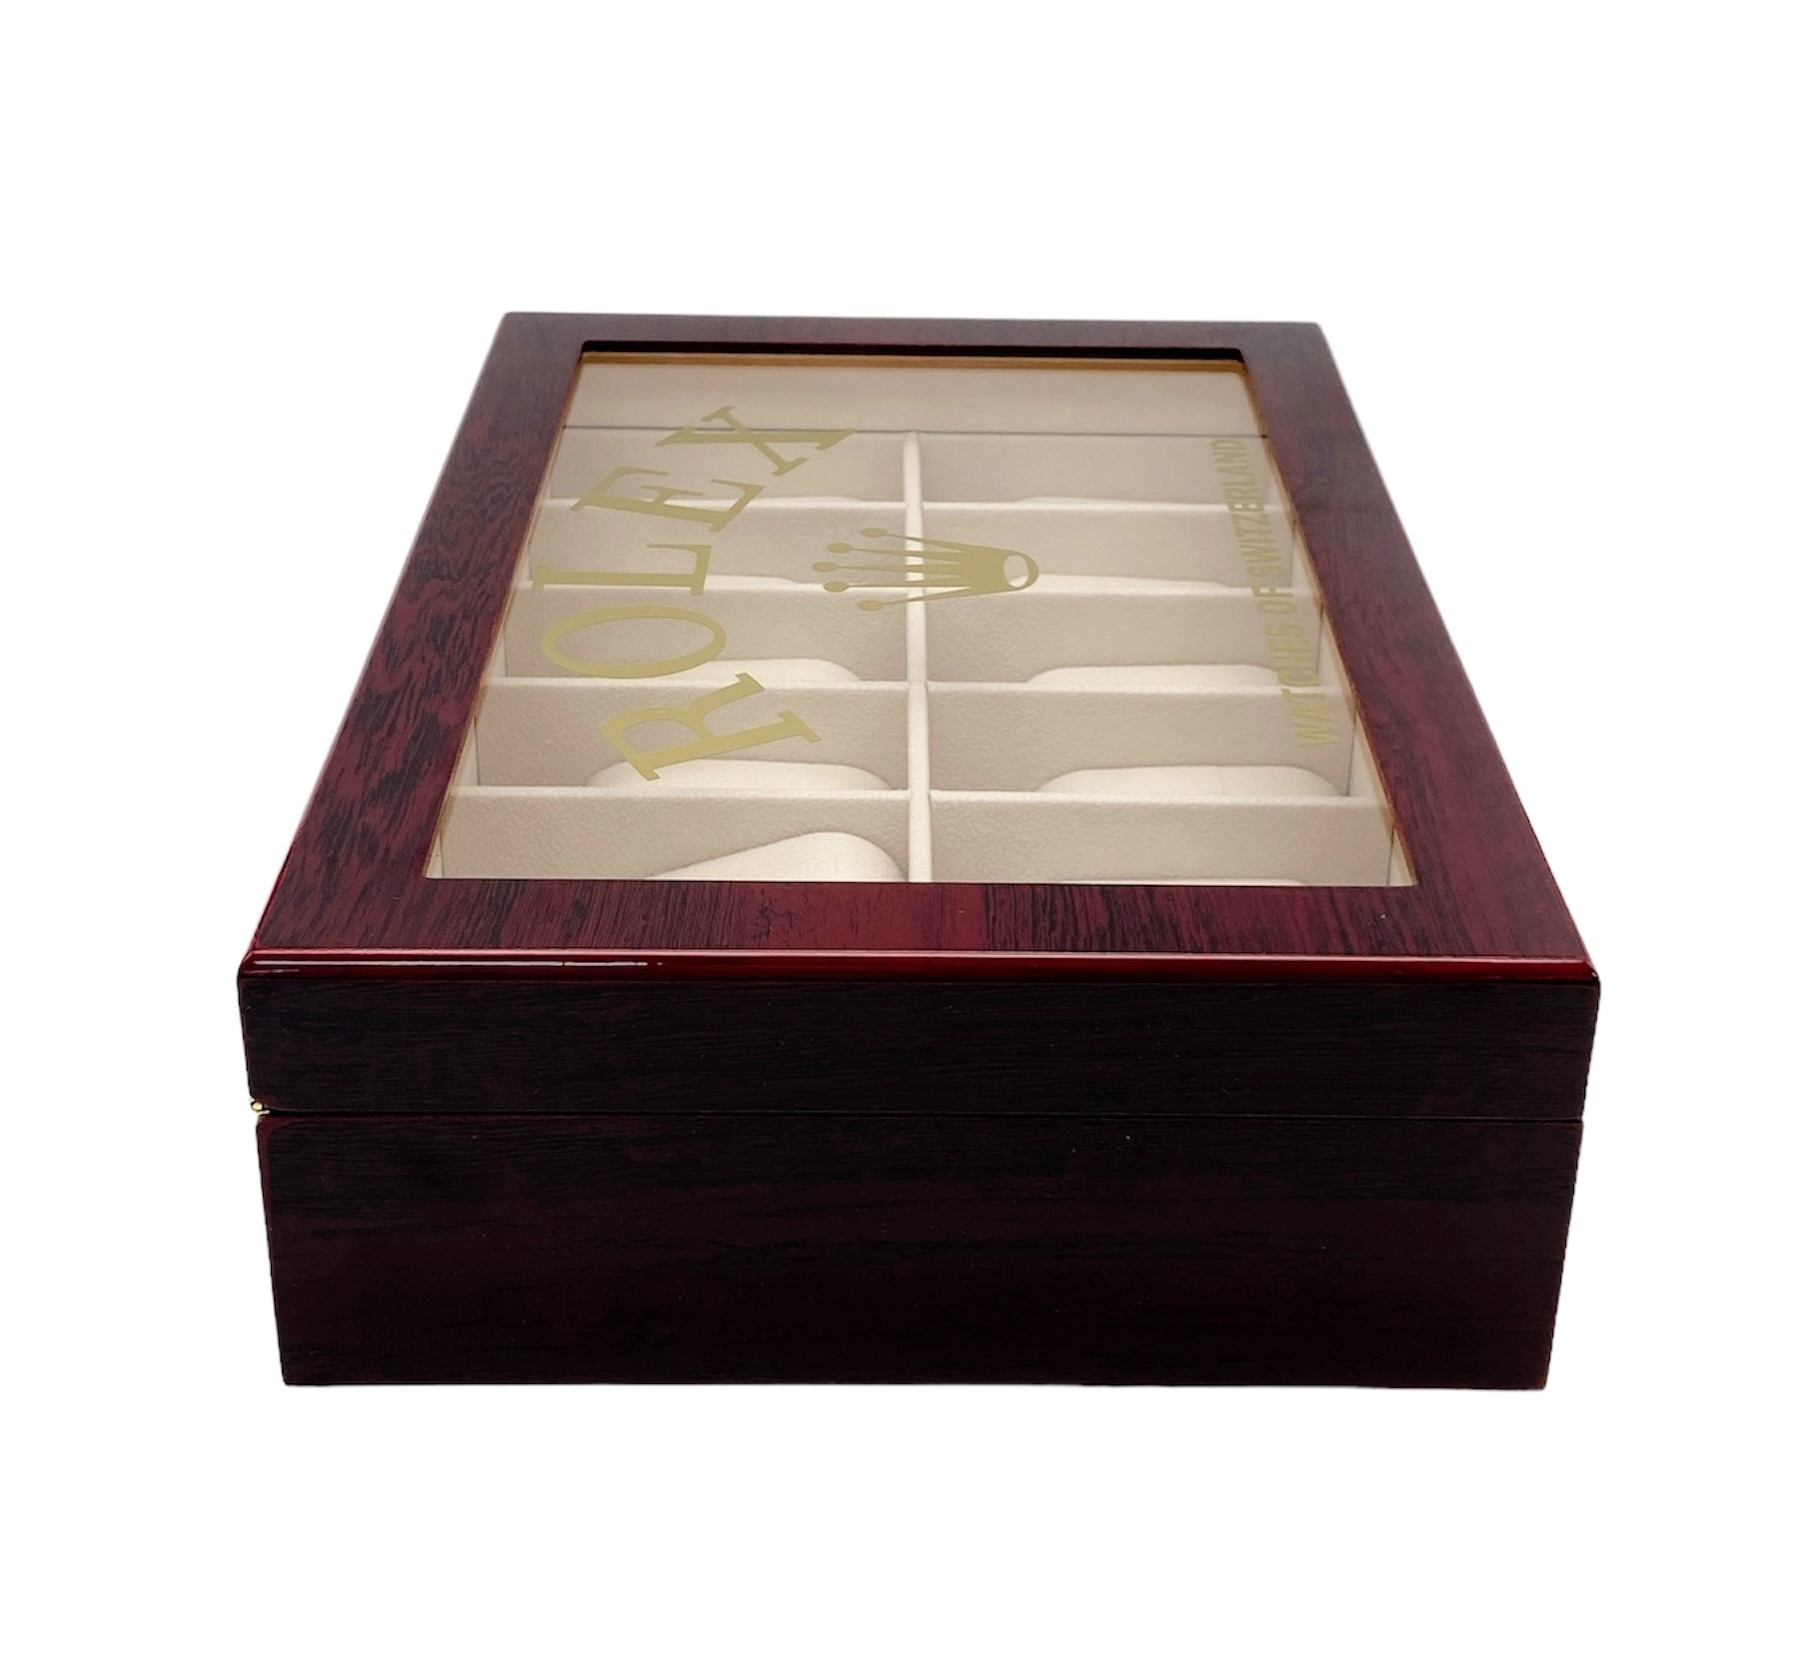 An Unused 12 Watch Display Case. Perfect for Rolex watches. 31.5 x 21.5 x 8.5cm. Rich Piano Finish. - Image 5 of 12